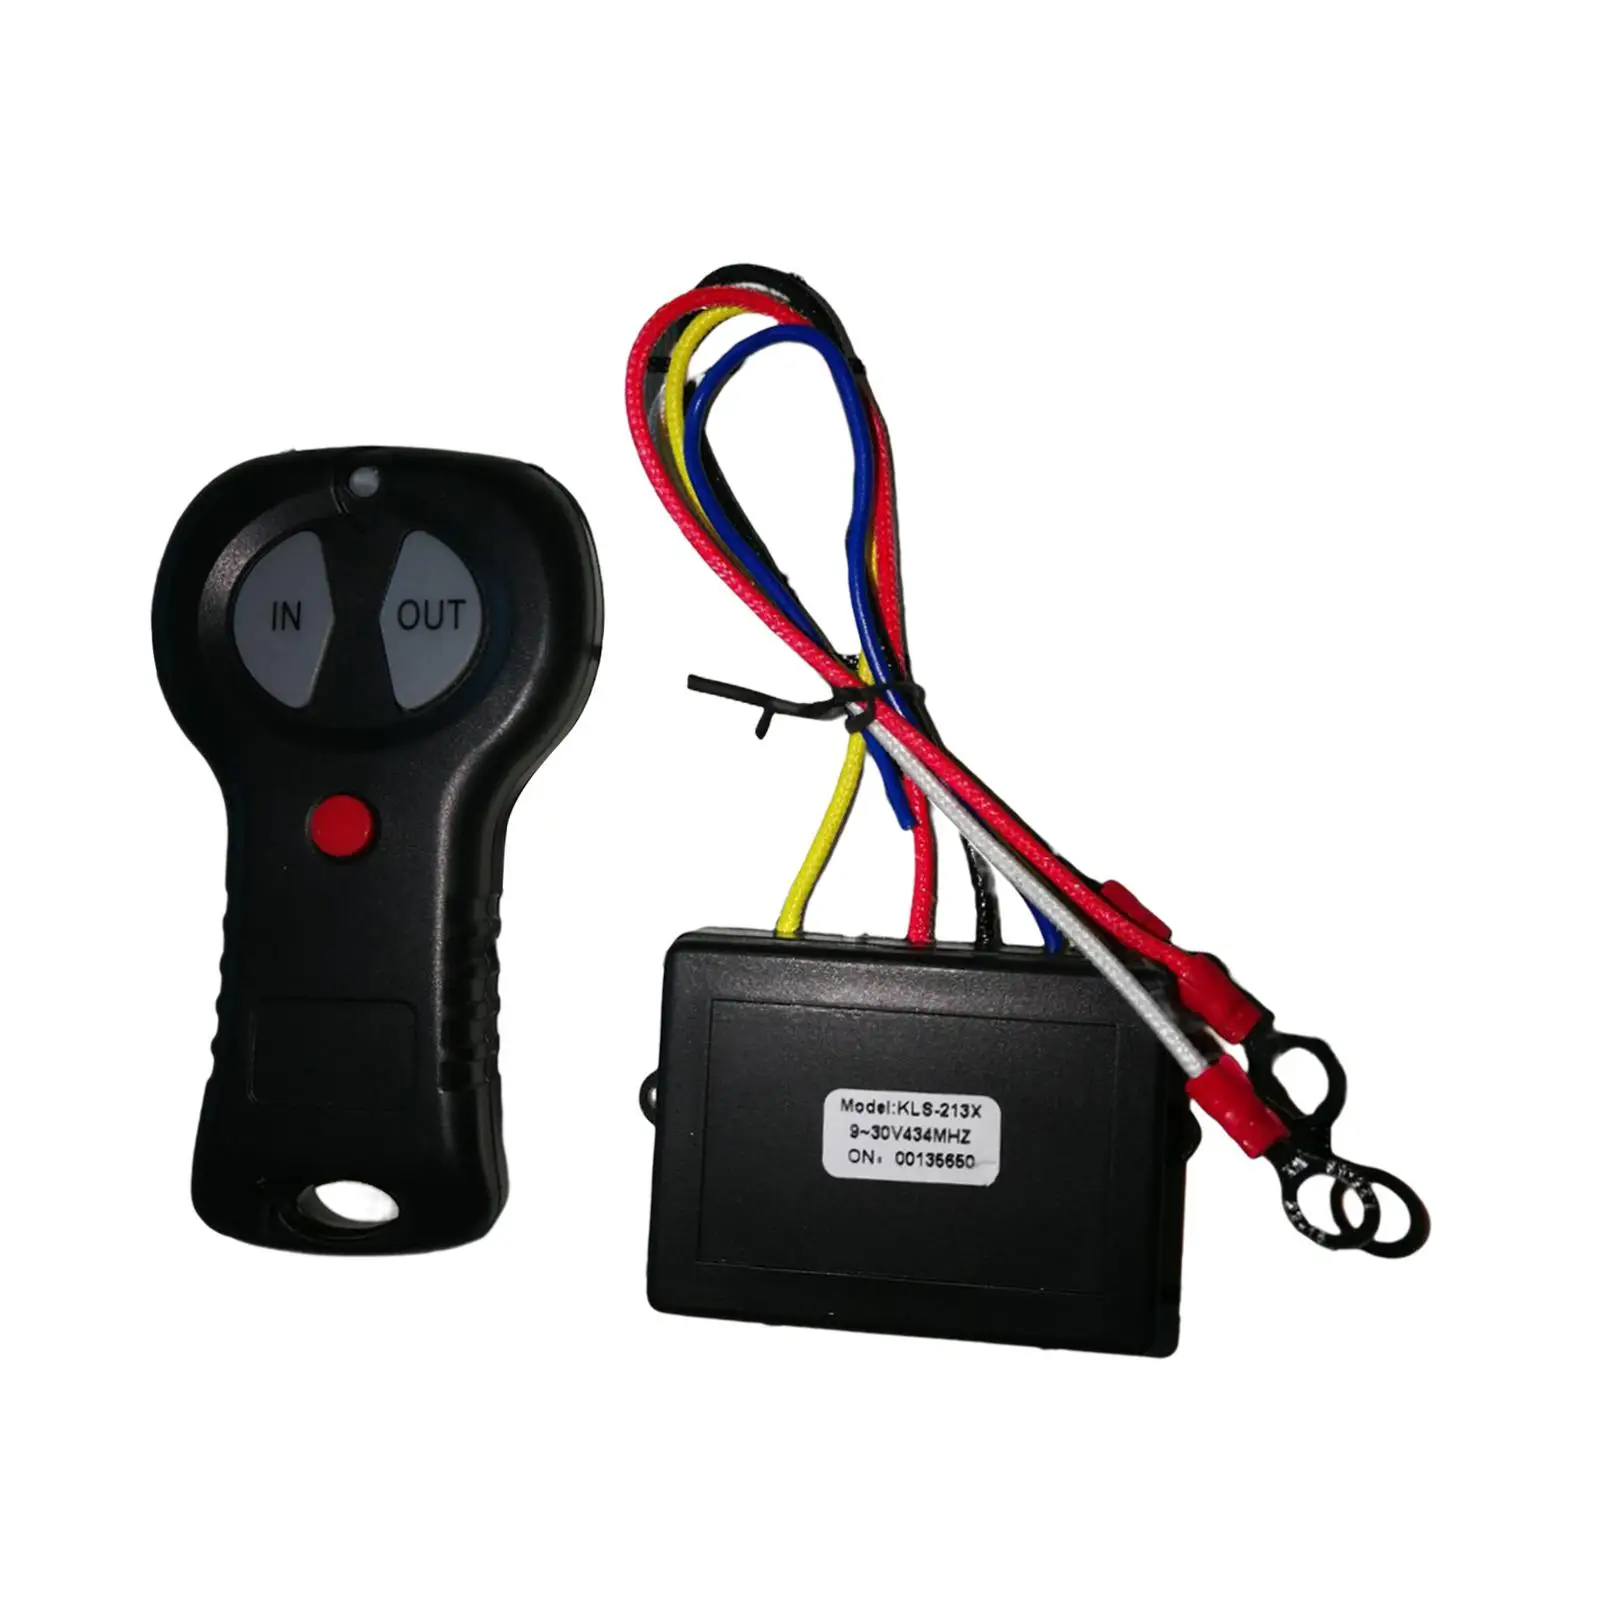 Winch Remote Control with Indicator Light Waterproof for Dump Trailer